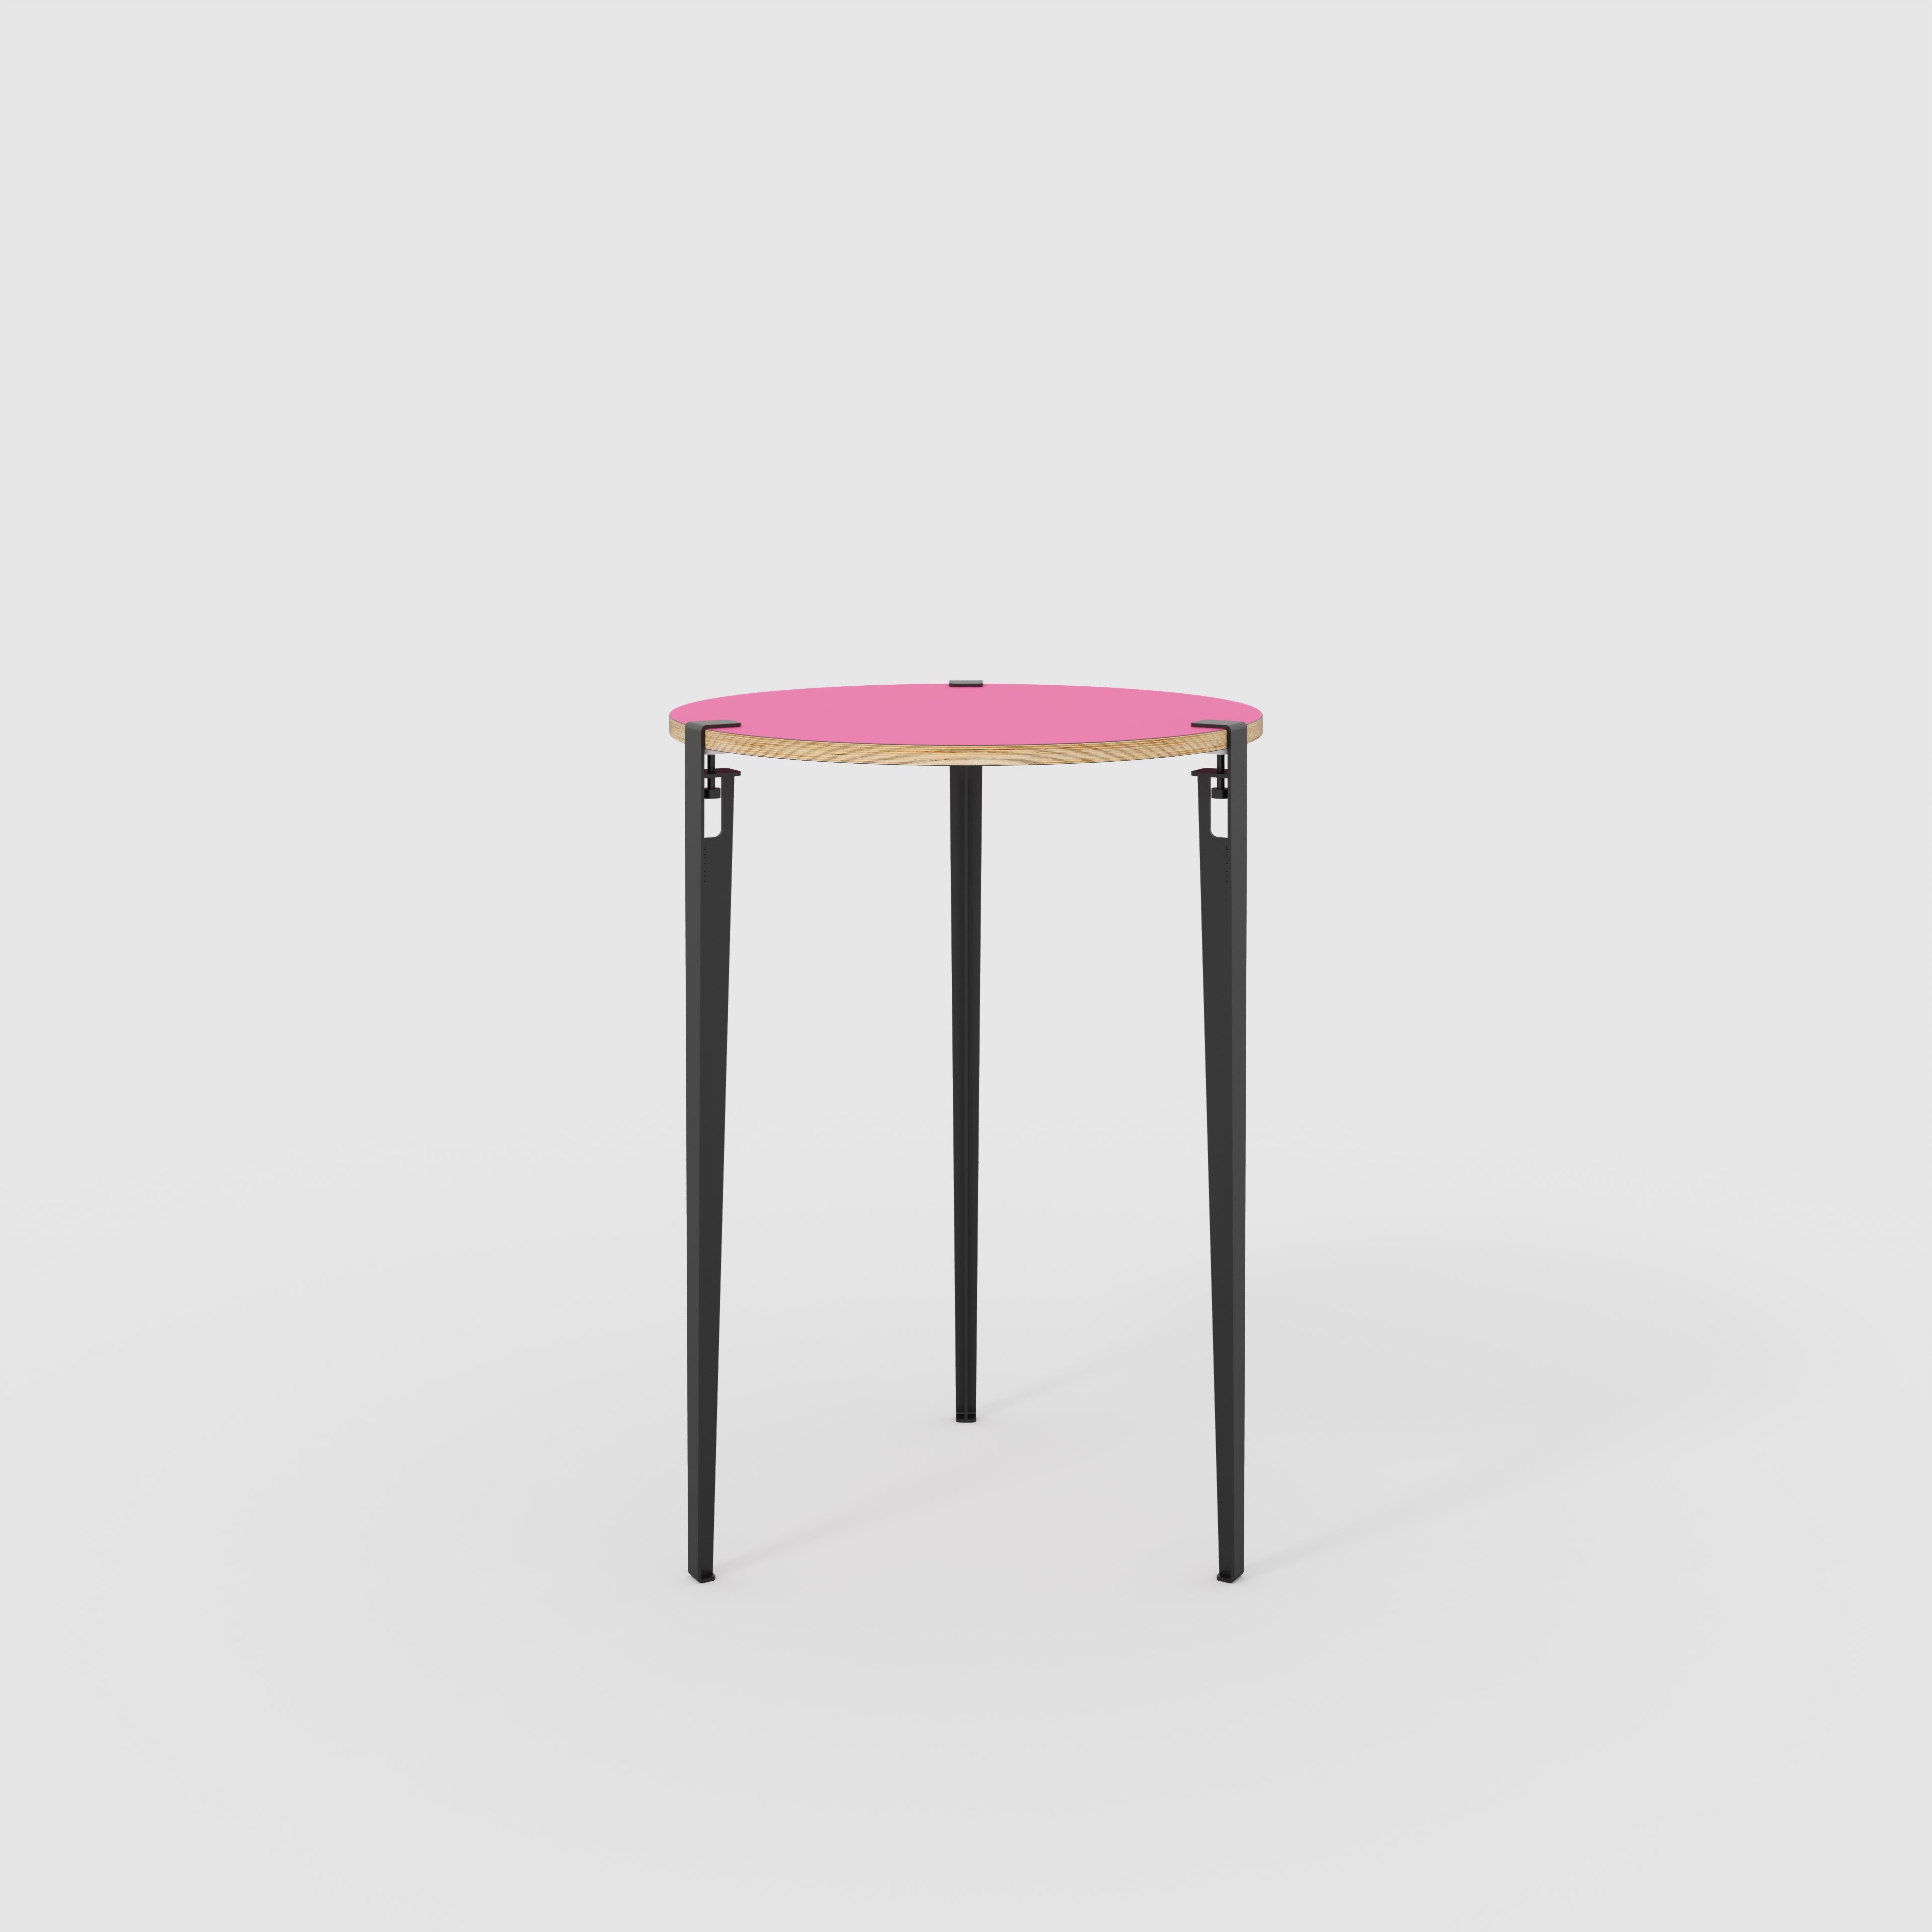 Round Table with Black Tiptoe Legs - Formica Juicy Pink - 800(dia) x 1100(h)